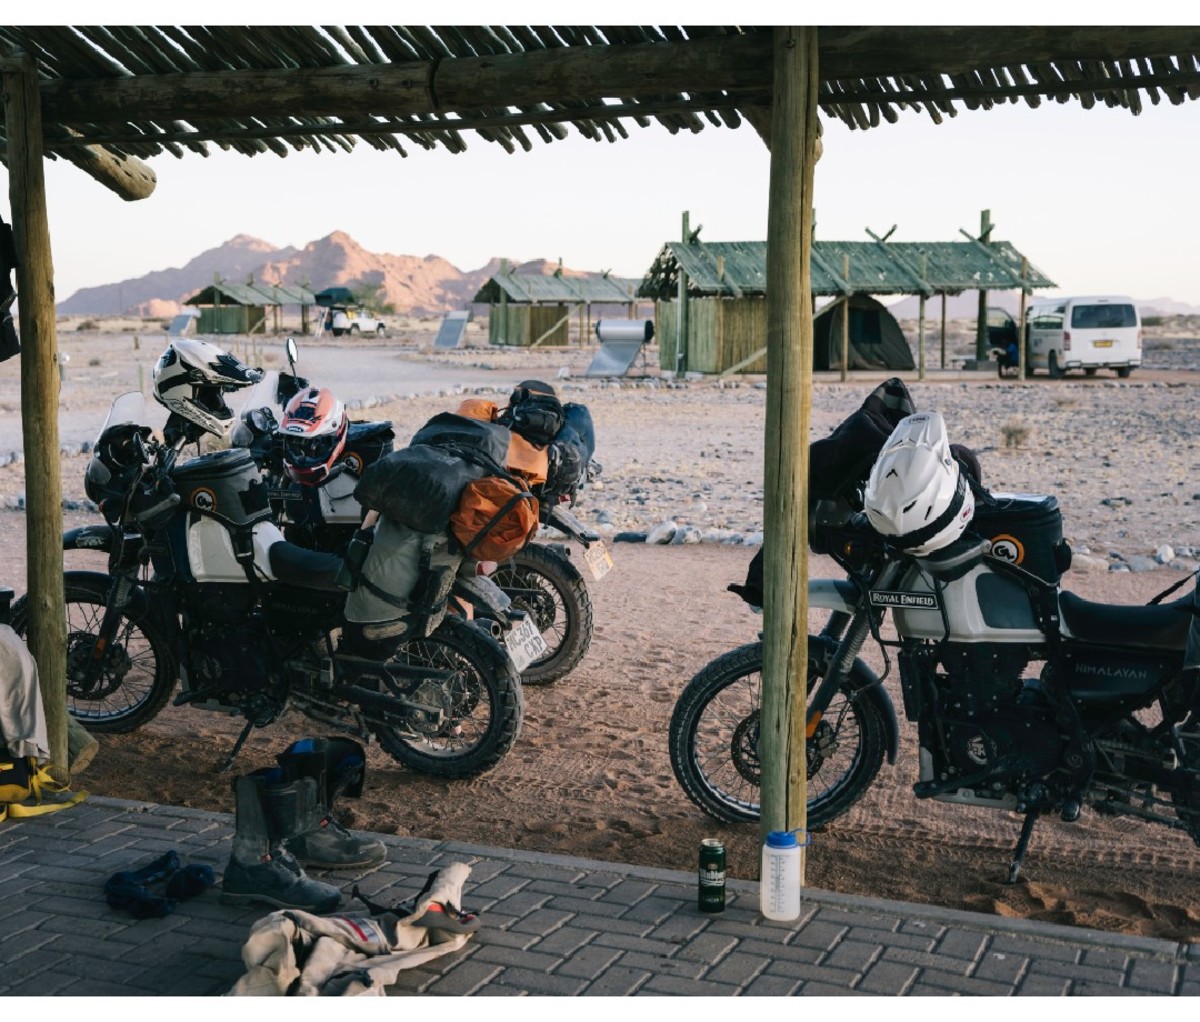 Motorcycles parked beside a hut-like Namib desert dwelling in Africa